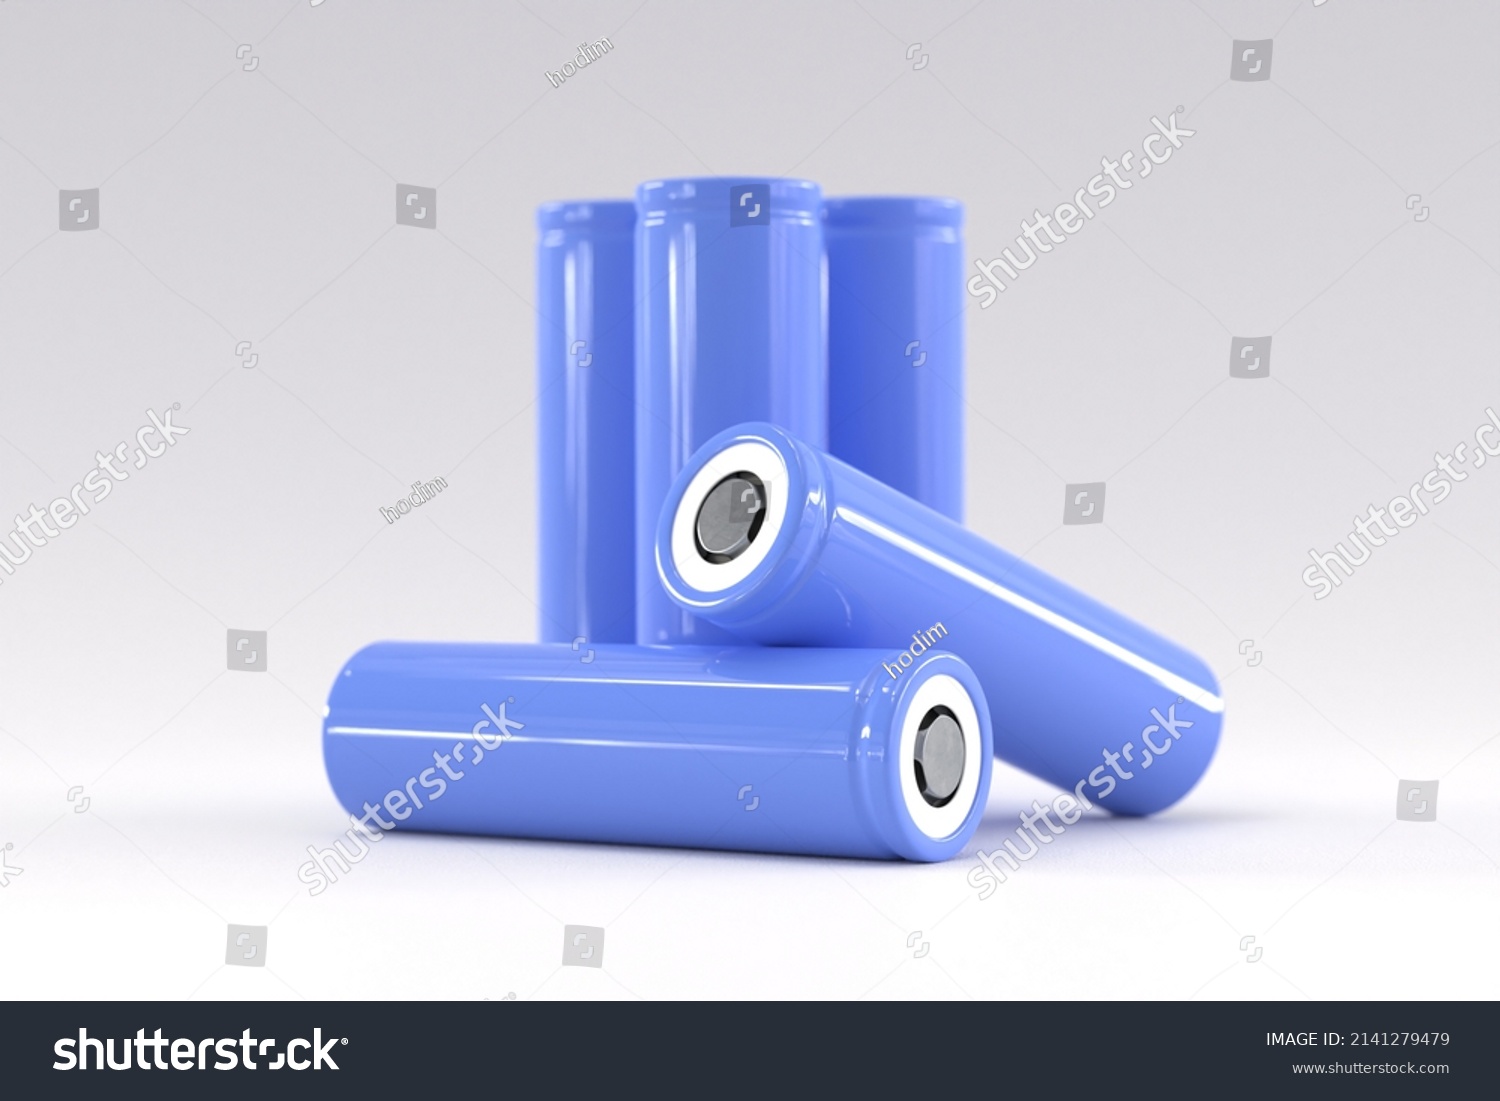 5 blue cylindrical batteries on a light gray background. Storage battery or secondary cell. Rechargeable li-ion batteries for electrical appliances and devices #2141279479